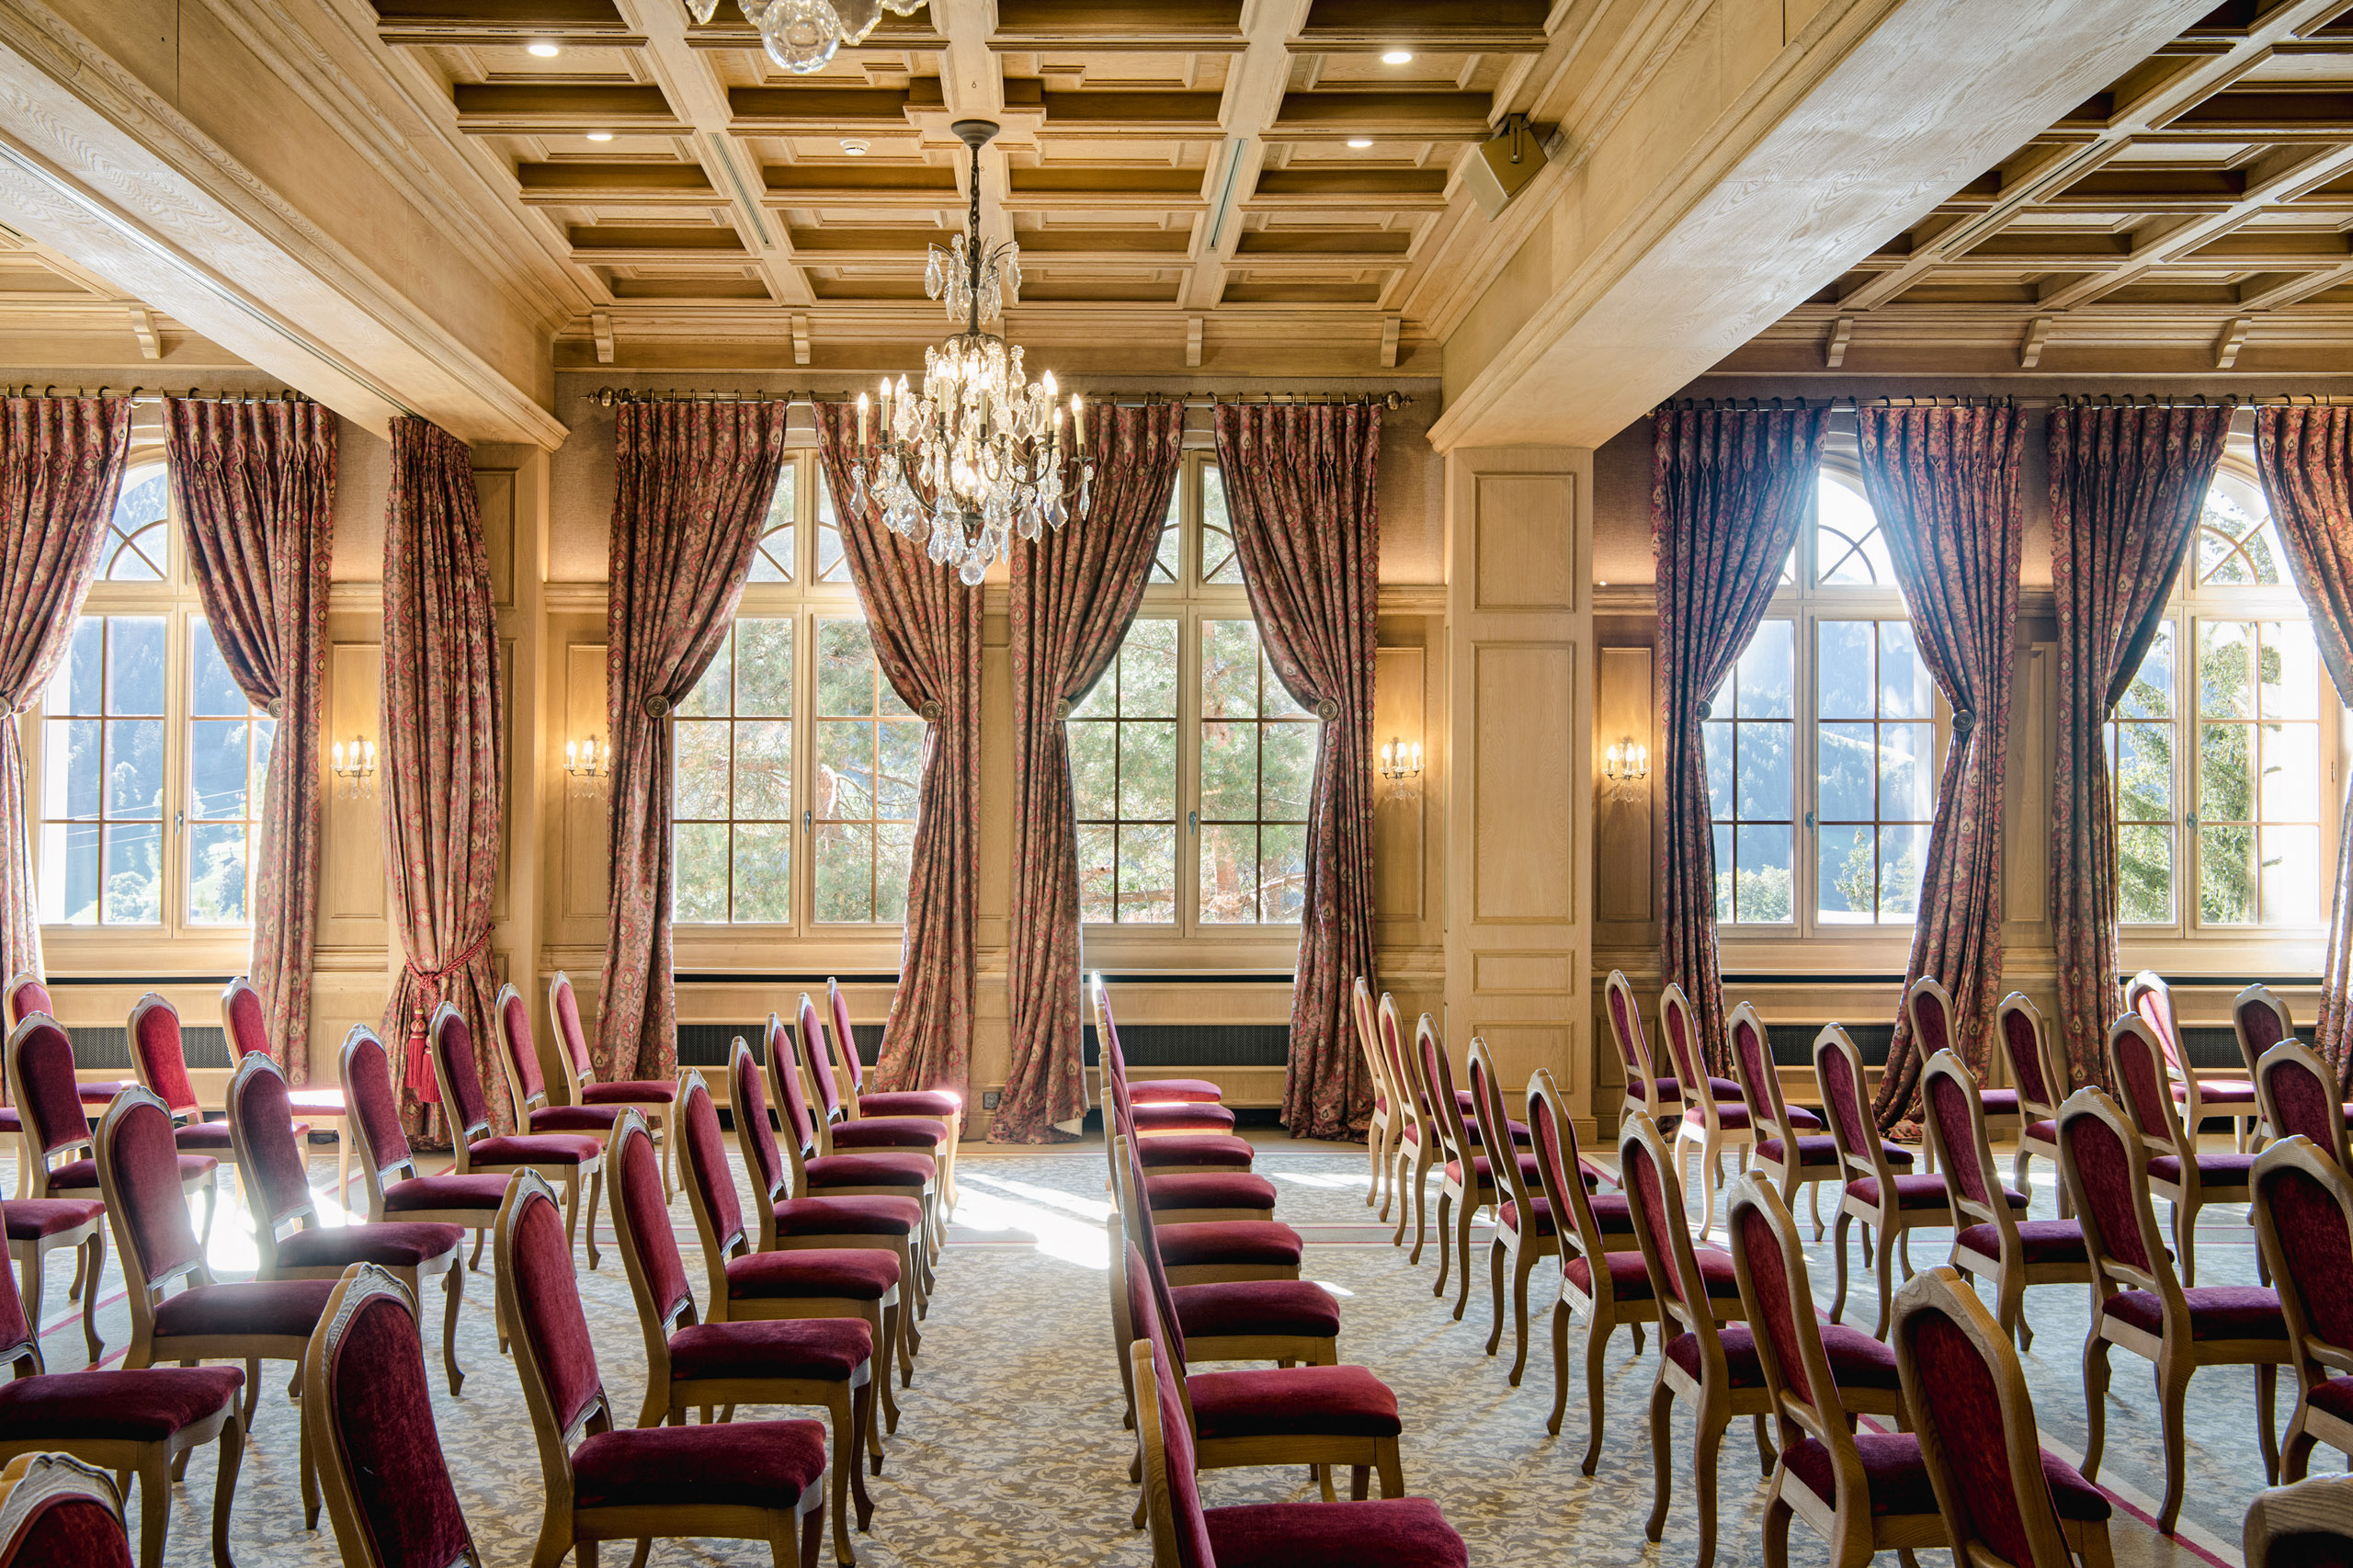 Gstaad Palace Hotel Salle Baccarat